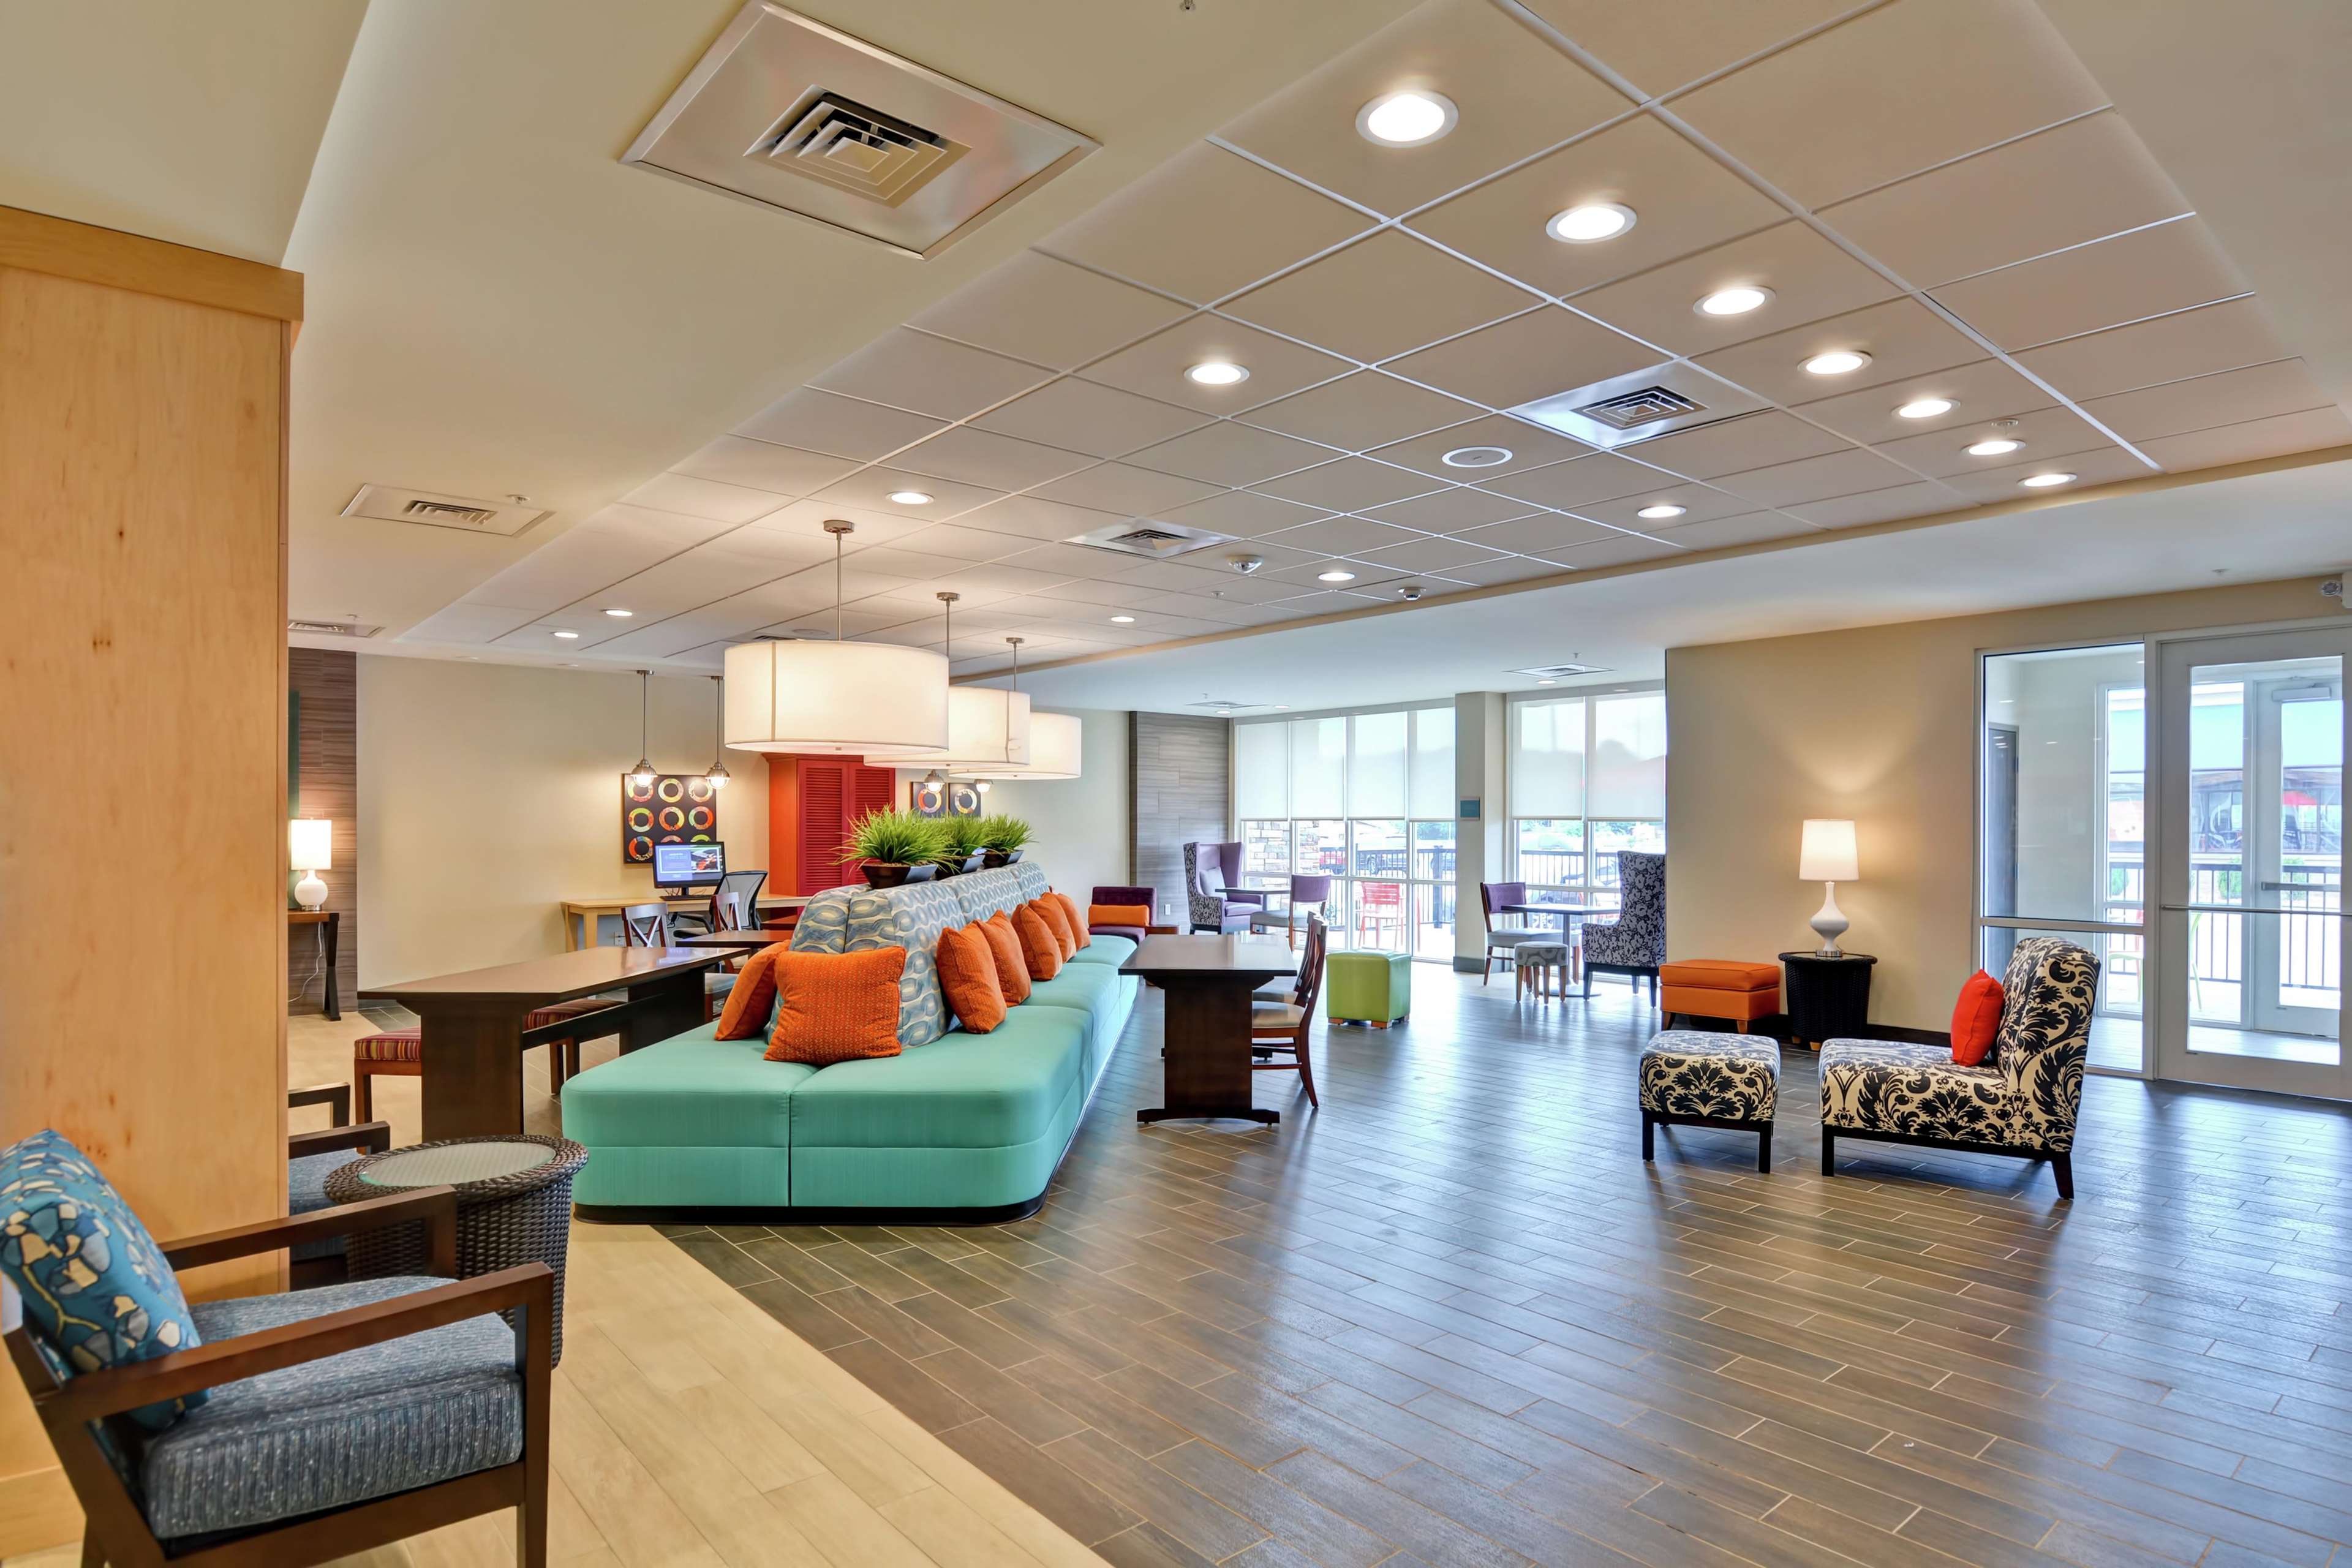 Home2 Suites by Hilton Meridian, MS Photo